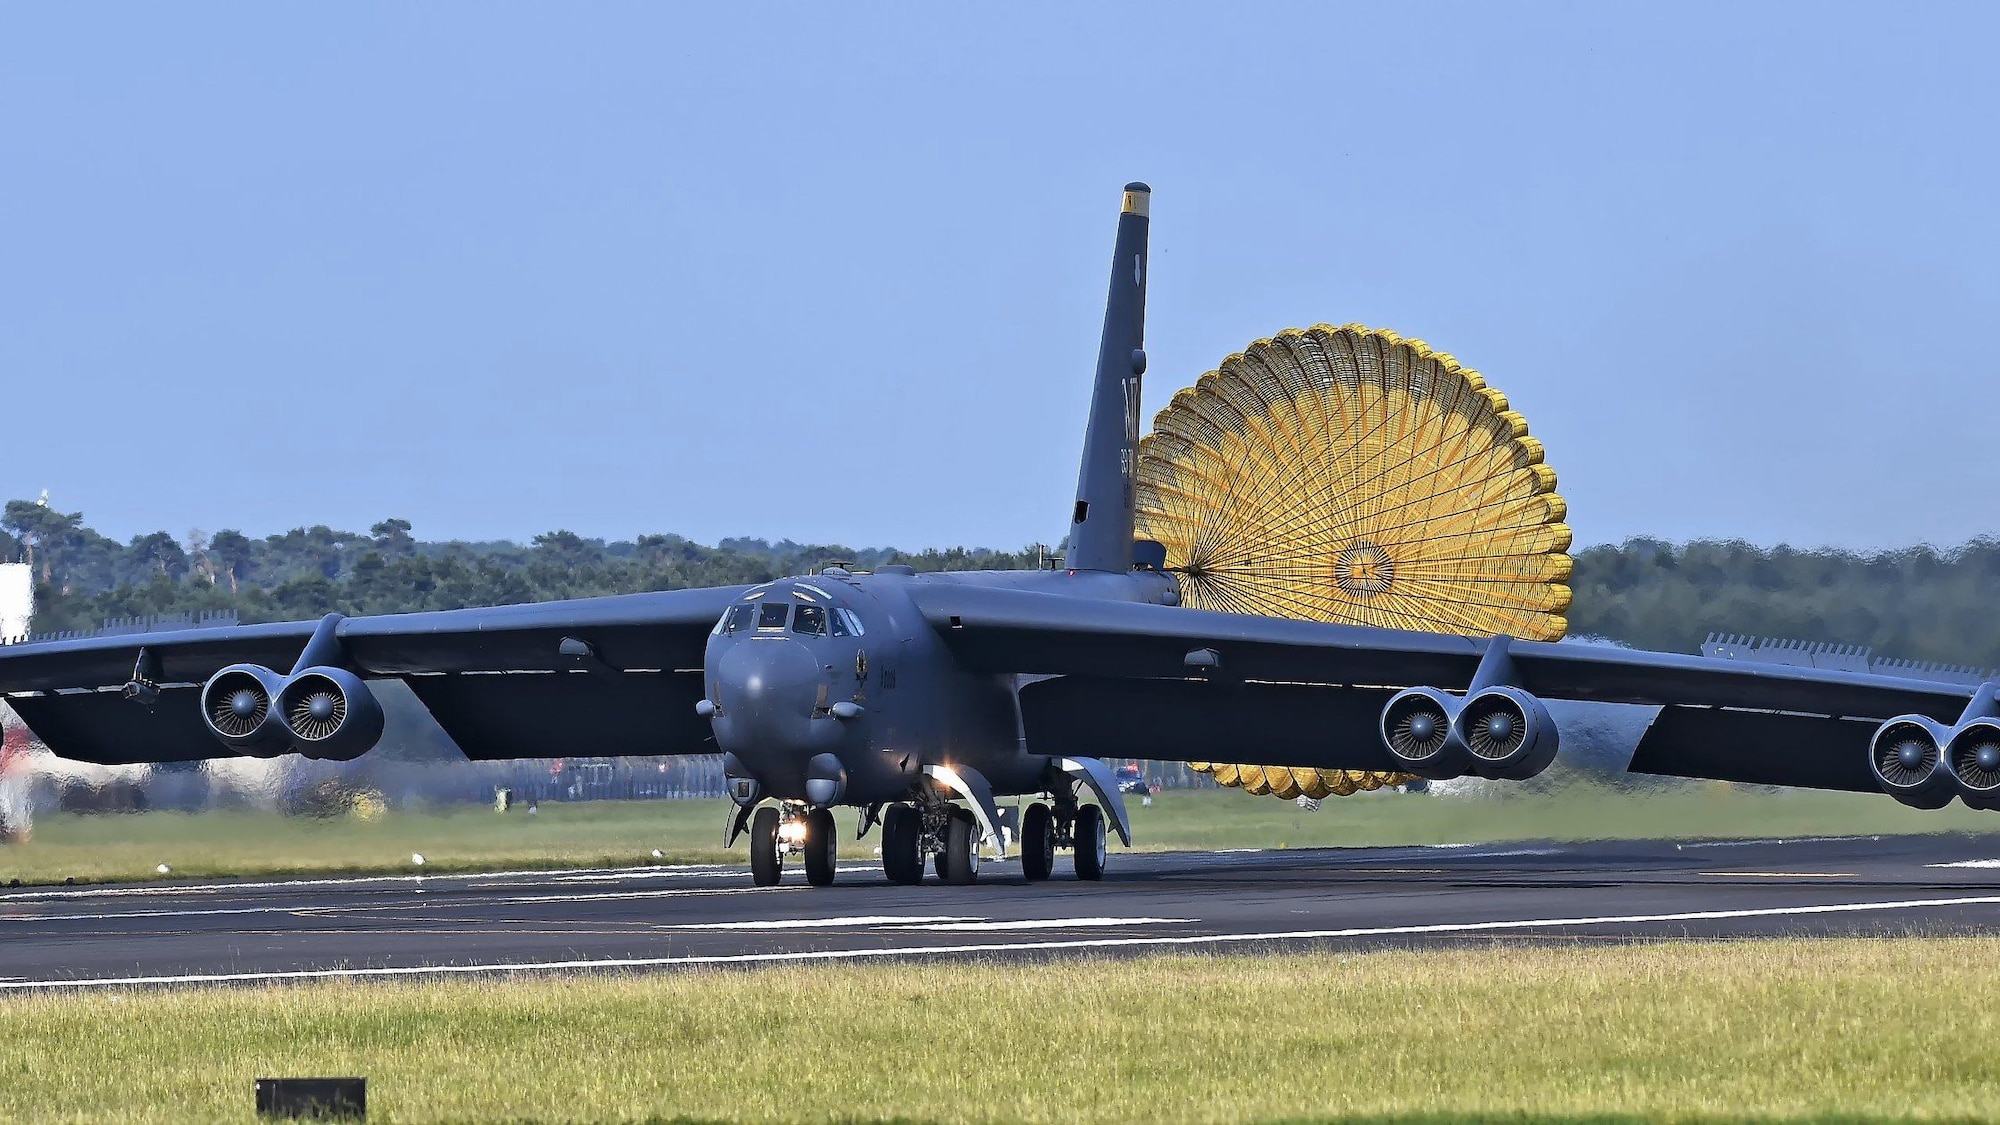 A B-52H Stratofortress from Minot Air Force Base, North Dakota, lands at RAF Mildenhall, England, after experiencing an in-flight emergency June 17, 2019. The B-52H was operating in the European theater supporting several exercises while in the region. (Courtesy photo)